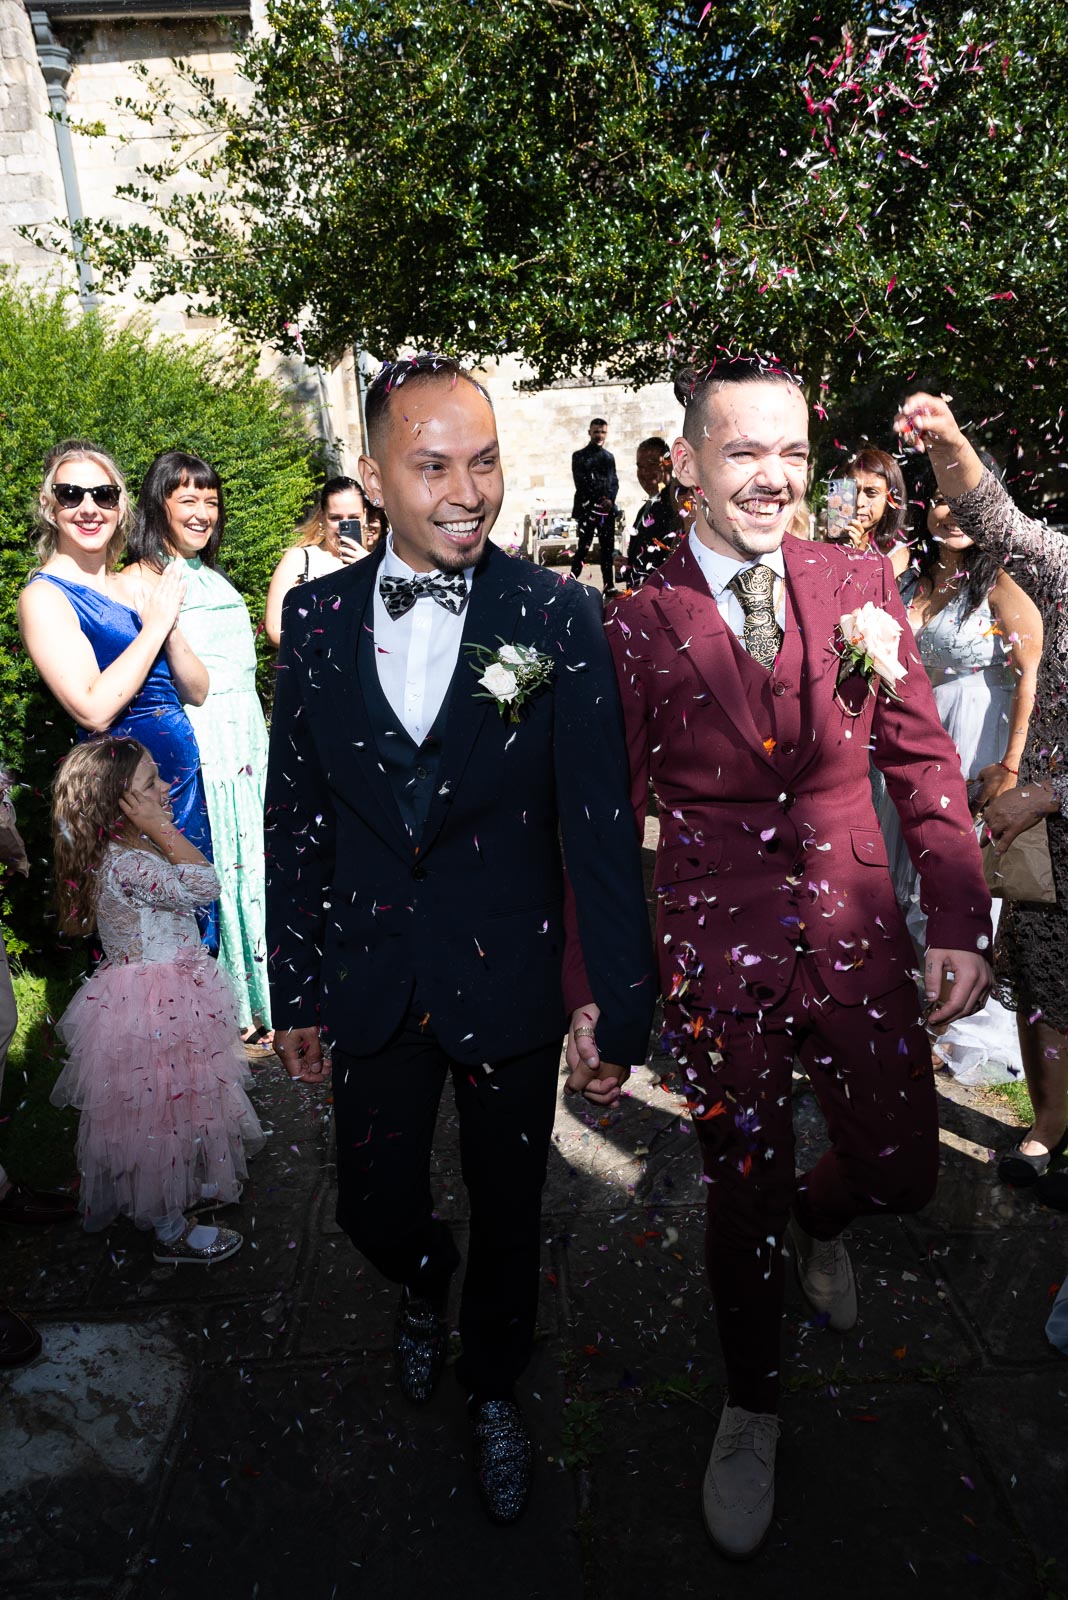 Ady and Jose walk through confetti thrown by their wedding guests in Southover Grange, Lewes.